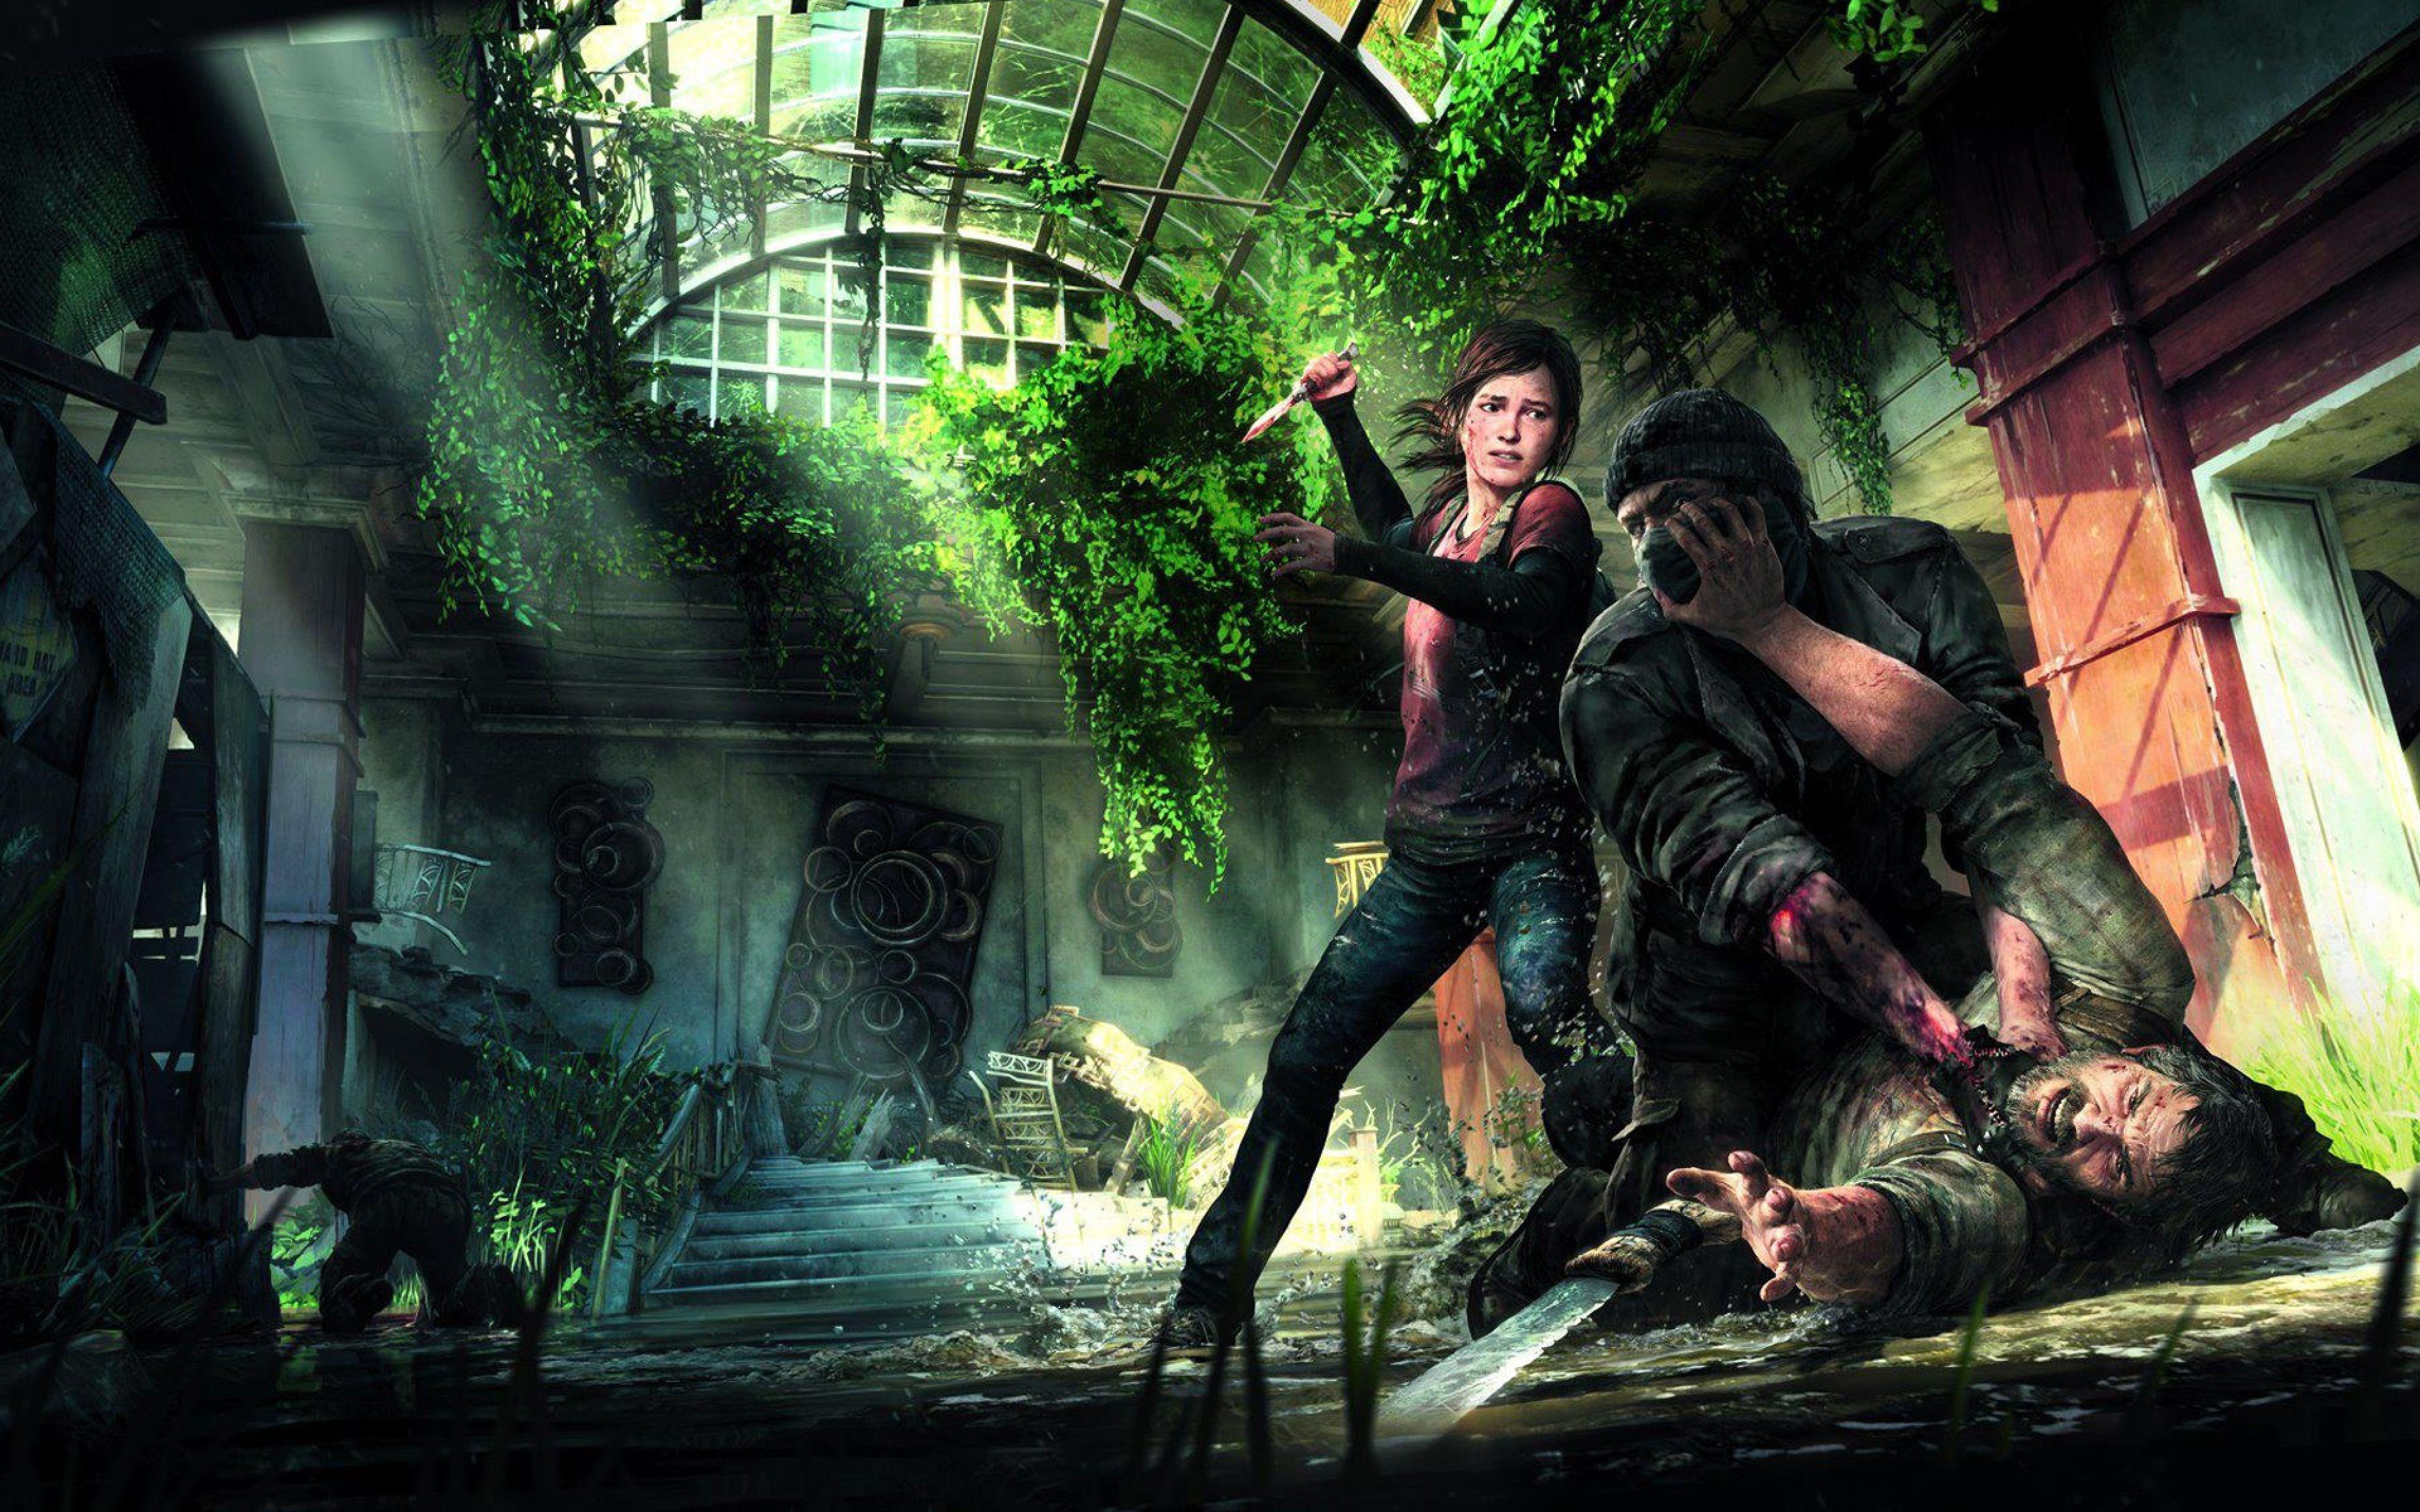 The Last Of Us Wallpapers - Wallpaper Cave